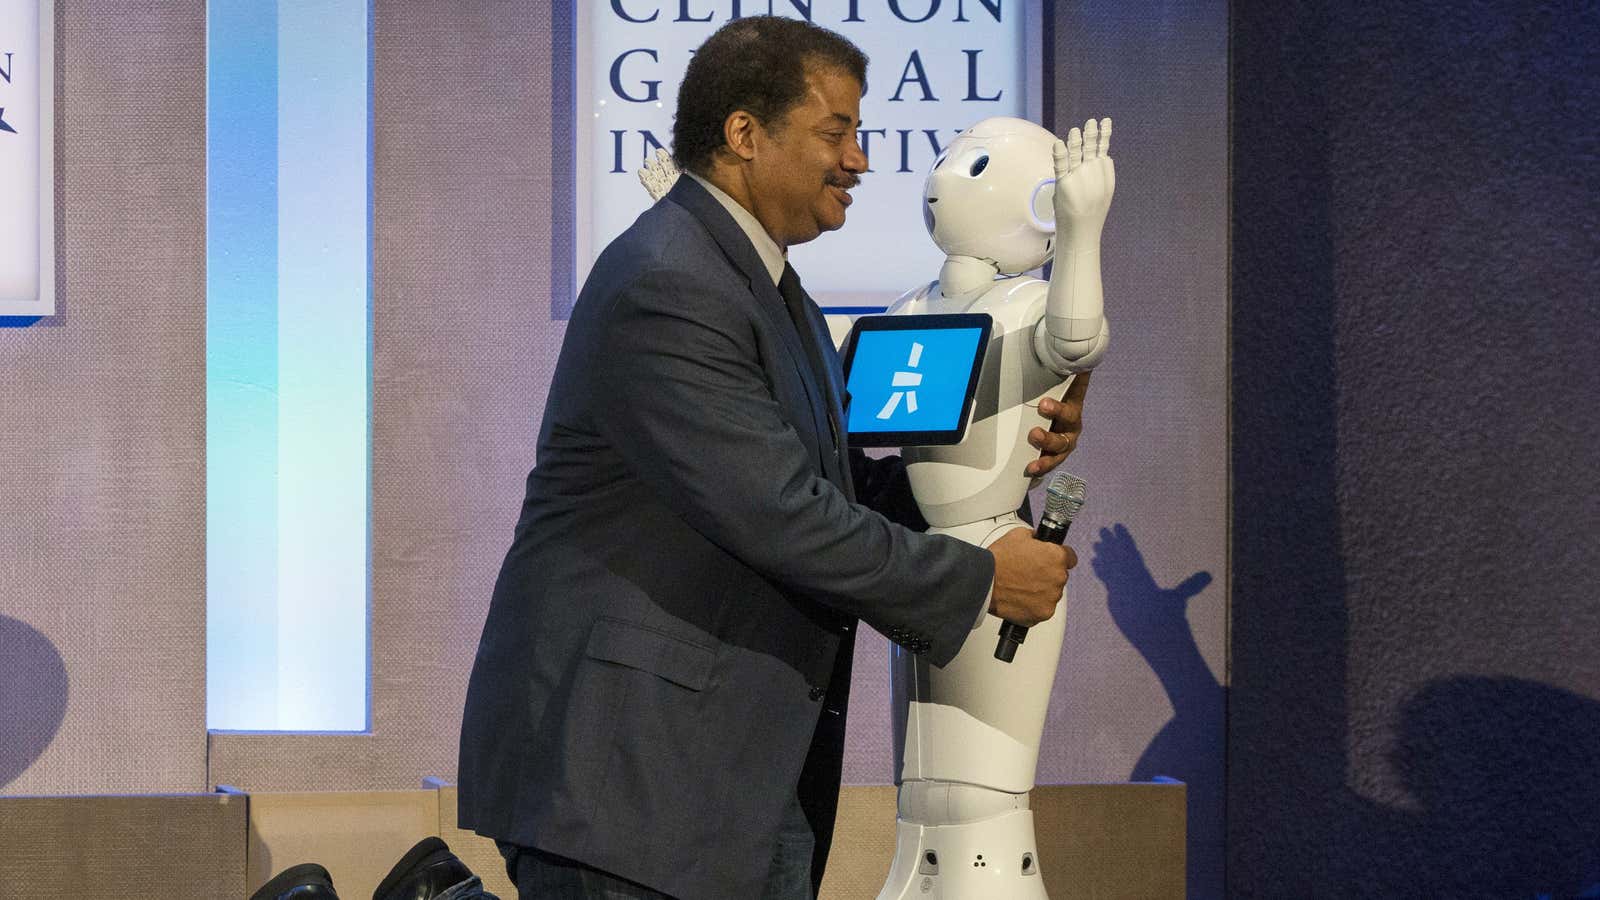 Tyson hugs Pepper, the robot recently fired from a supermarket job for incompetence.